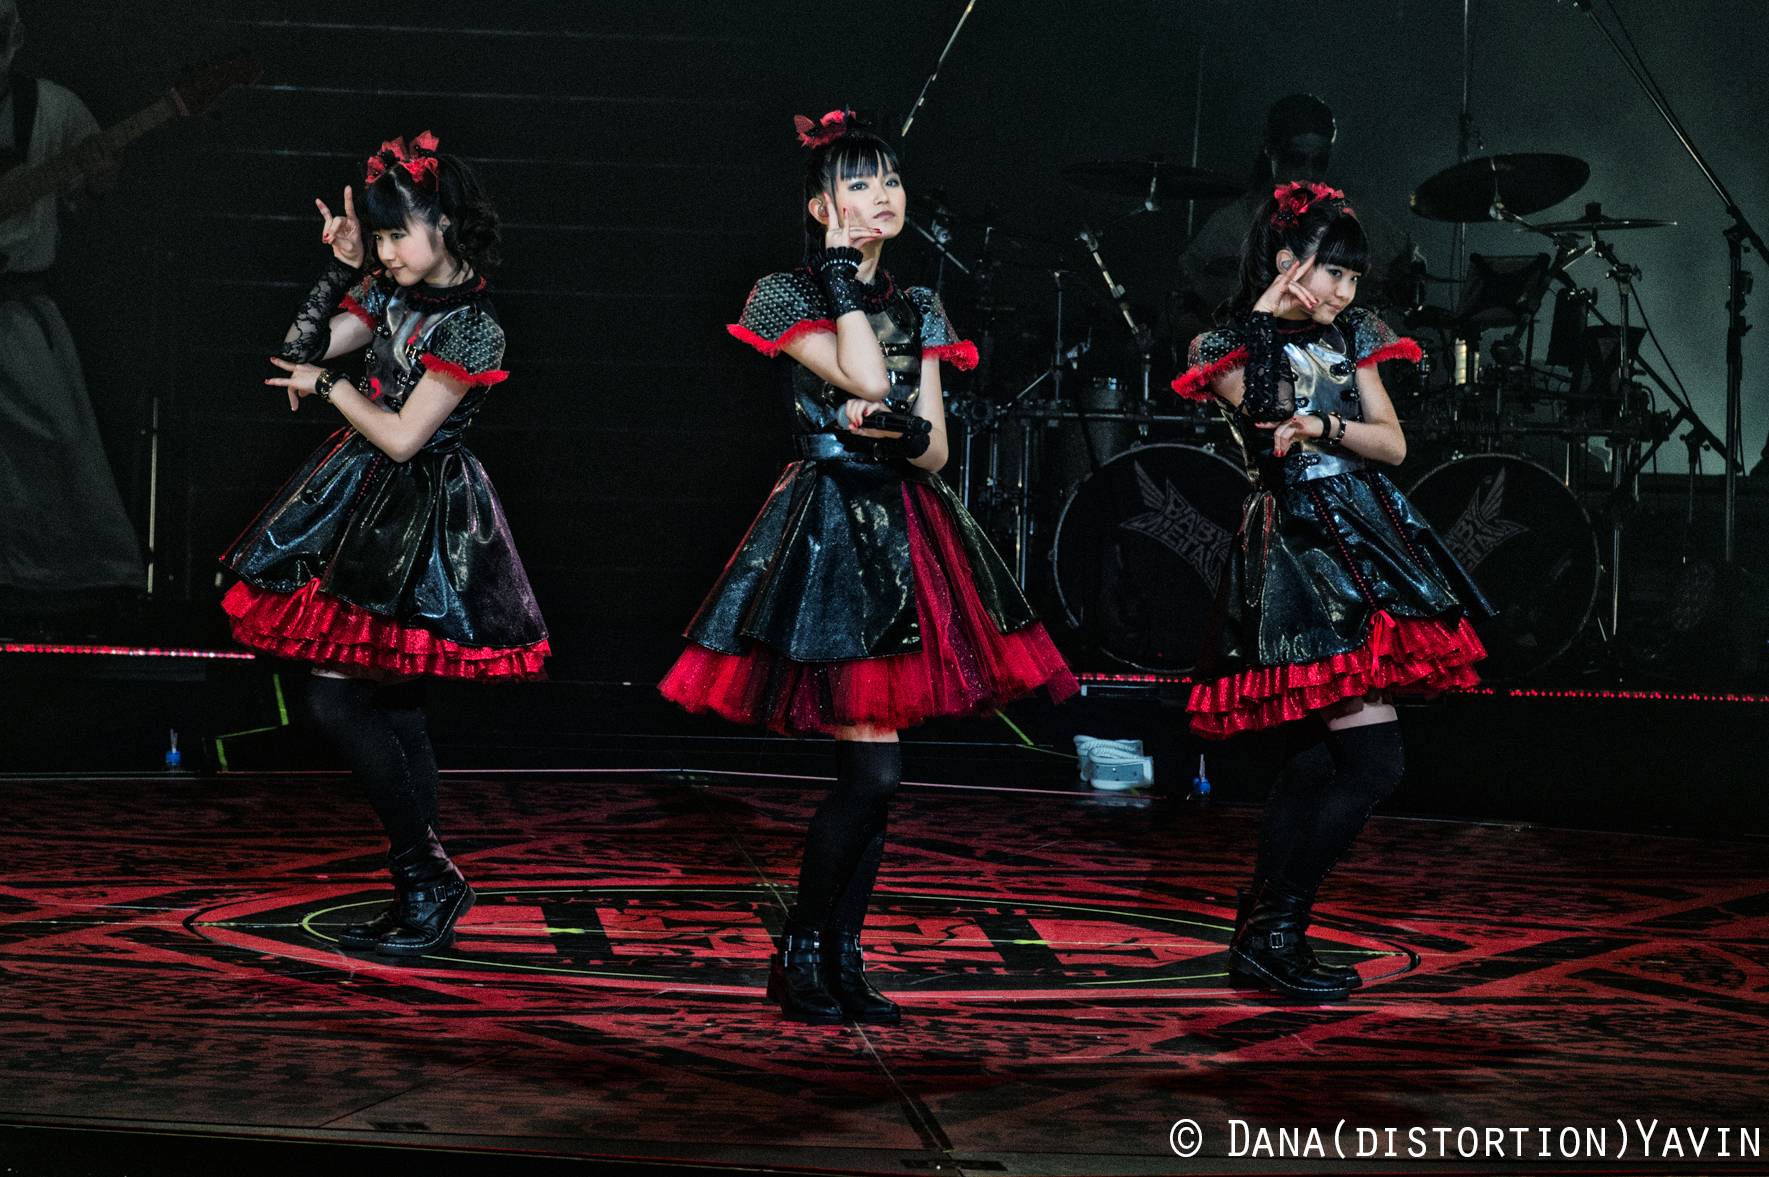 Fellow Hedobangers, show us which BabyMetal image you feel that